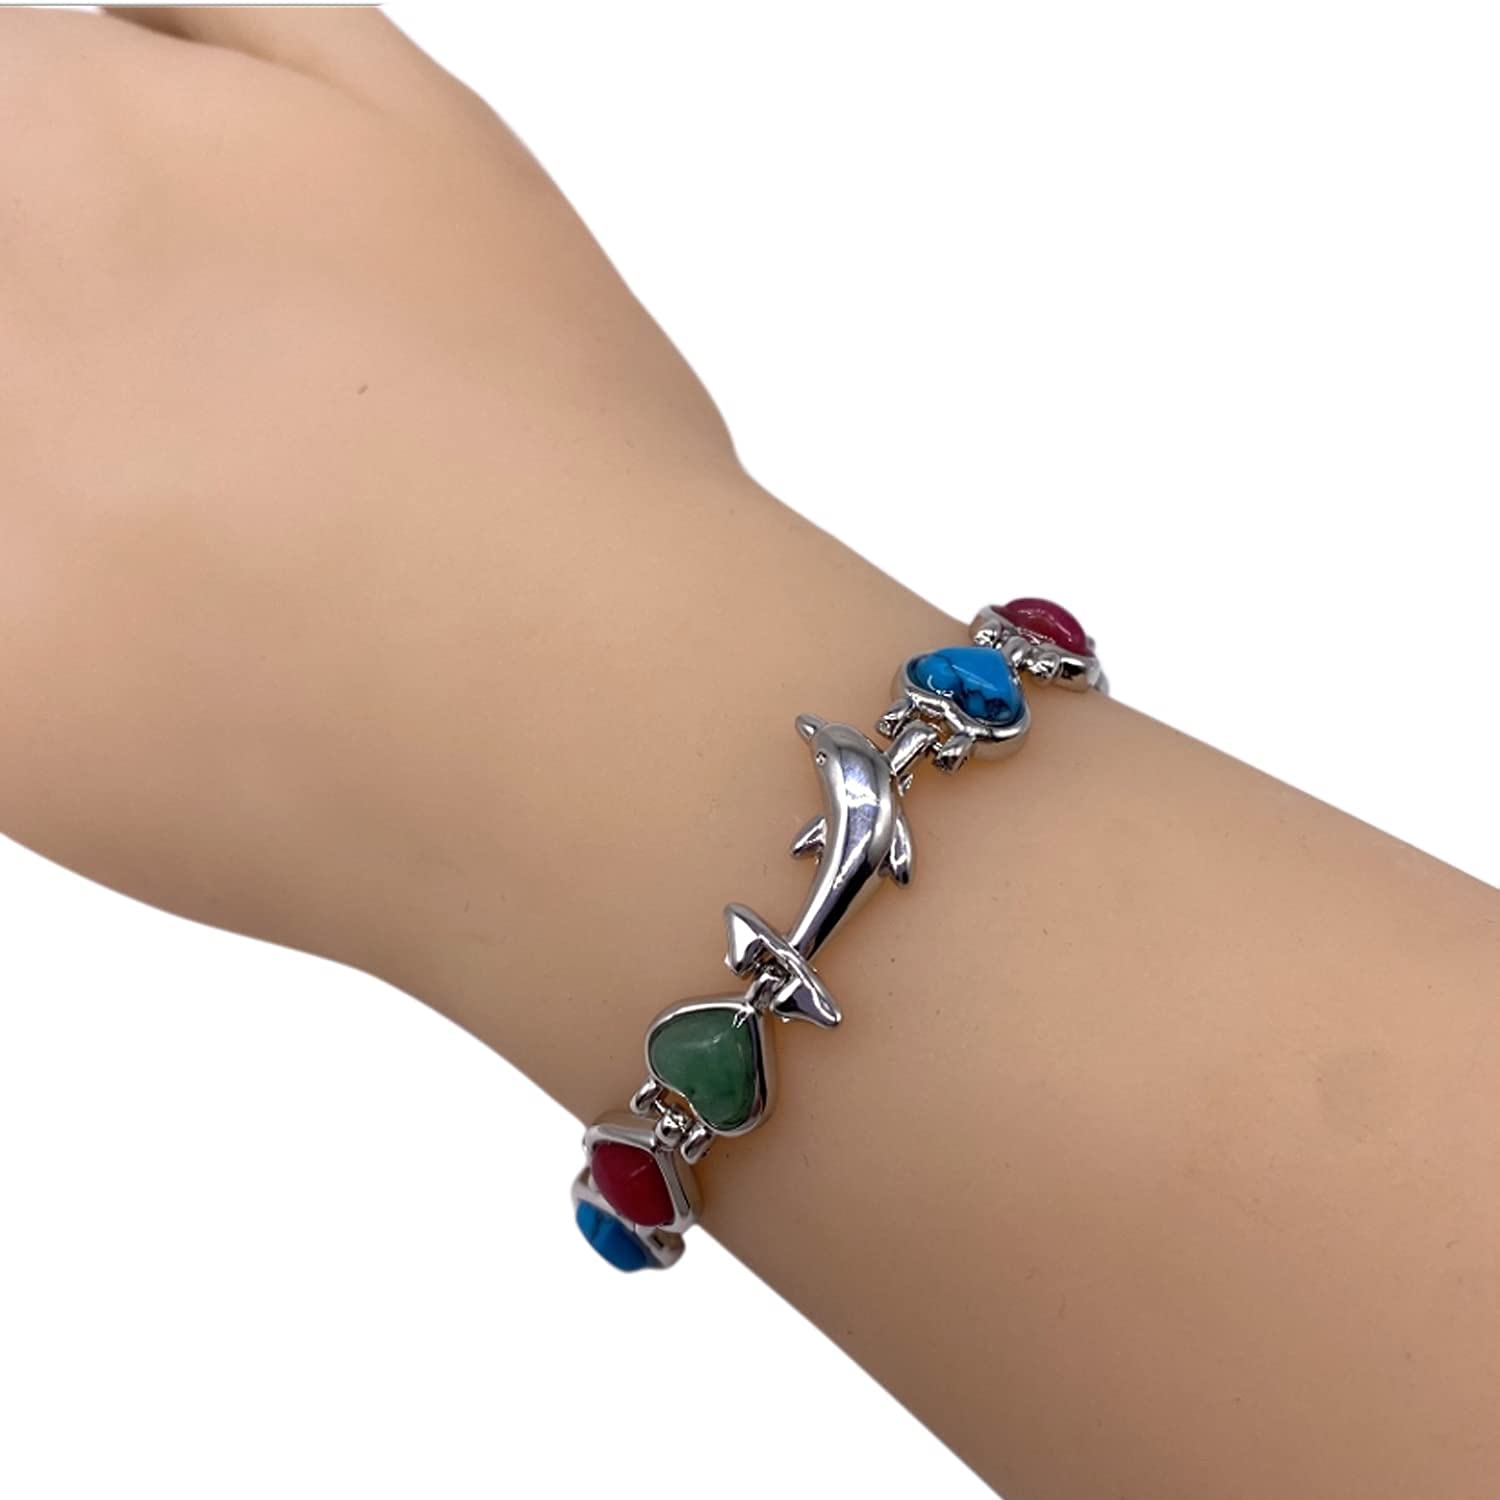 Ladies Magnetic Bracelet for Women - Natural Gemstone Heart Crystals &amp; Dolphins - Fits Wrists Up to 18.5cm Adjustable - Plus Jewellery Gift Box (Silver)